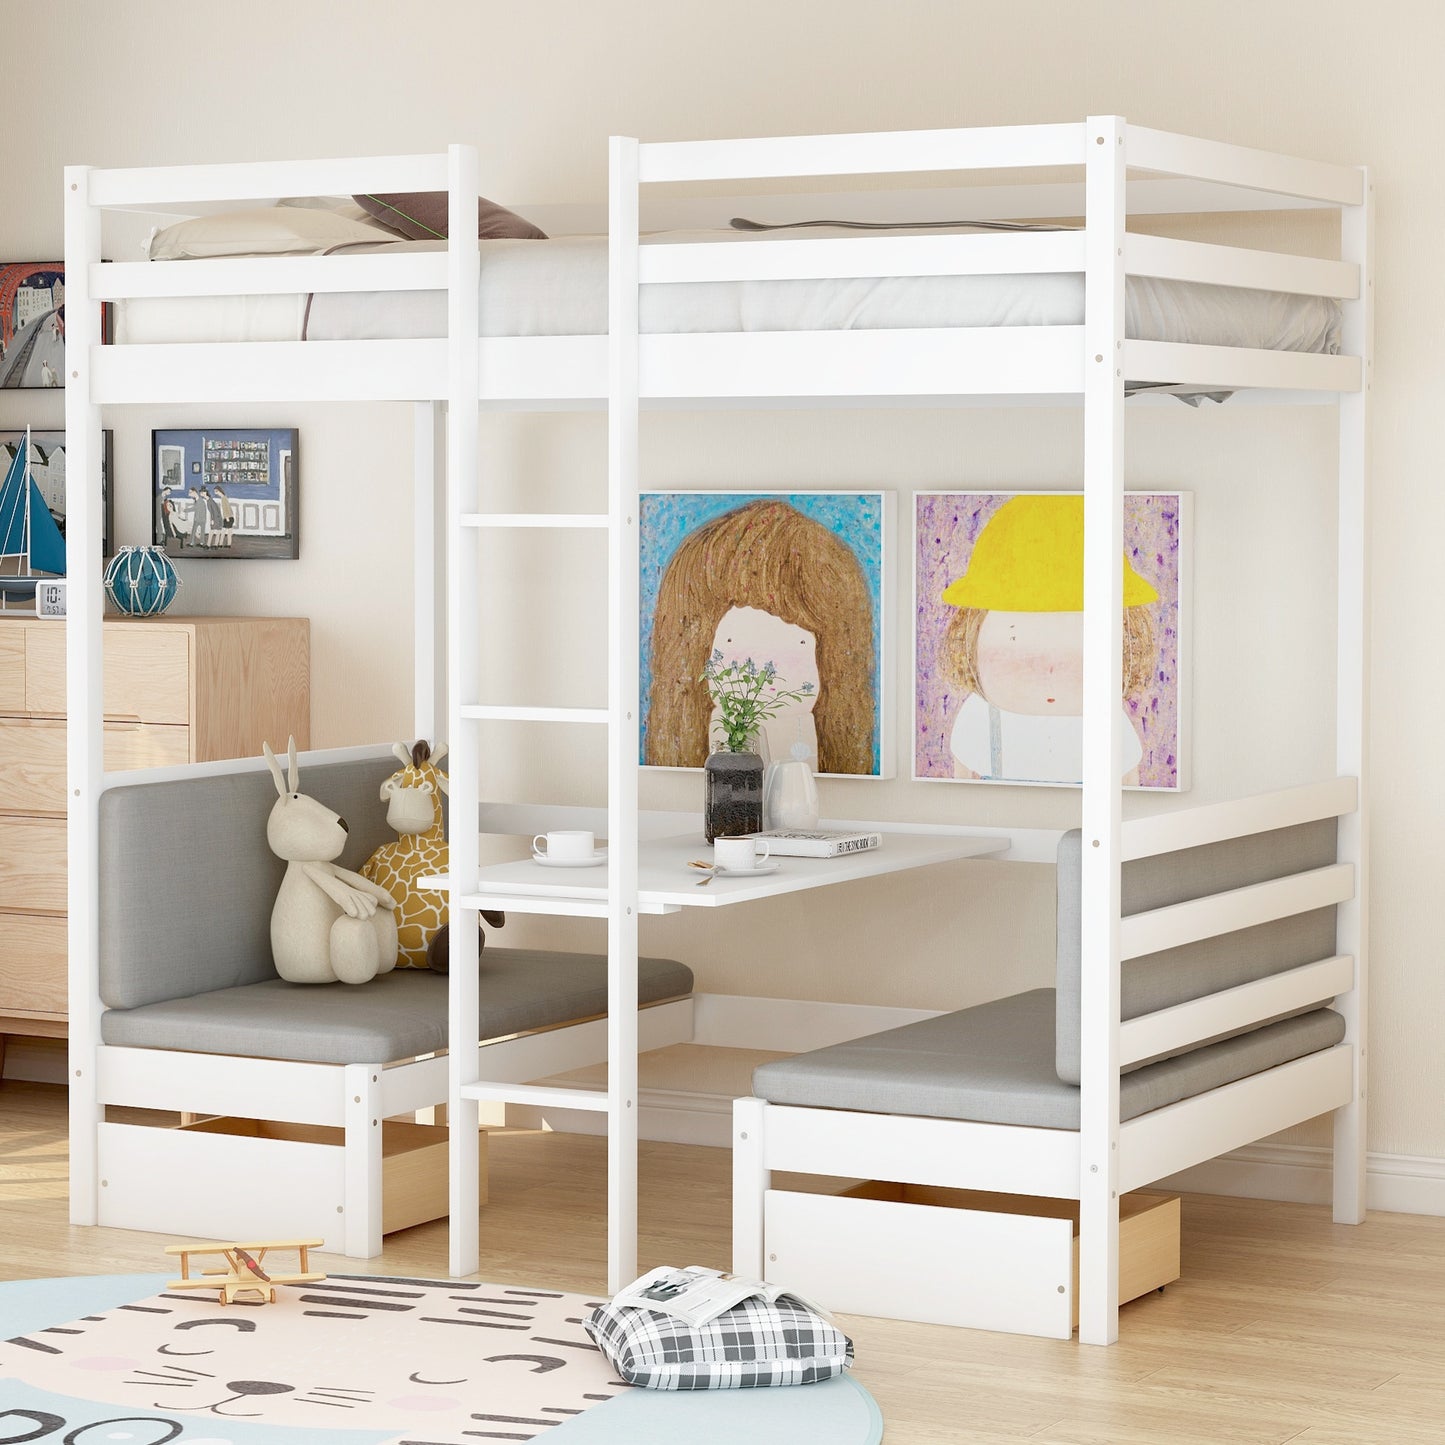 Functional Loft Bed  Turn Into Upper Bed and Down Desk